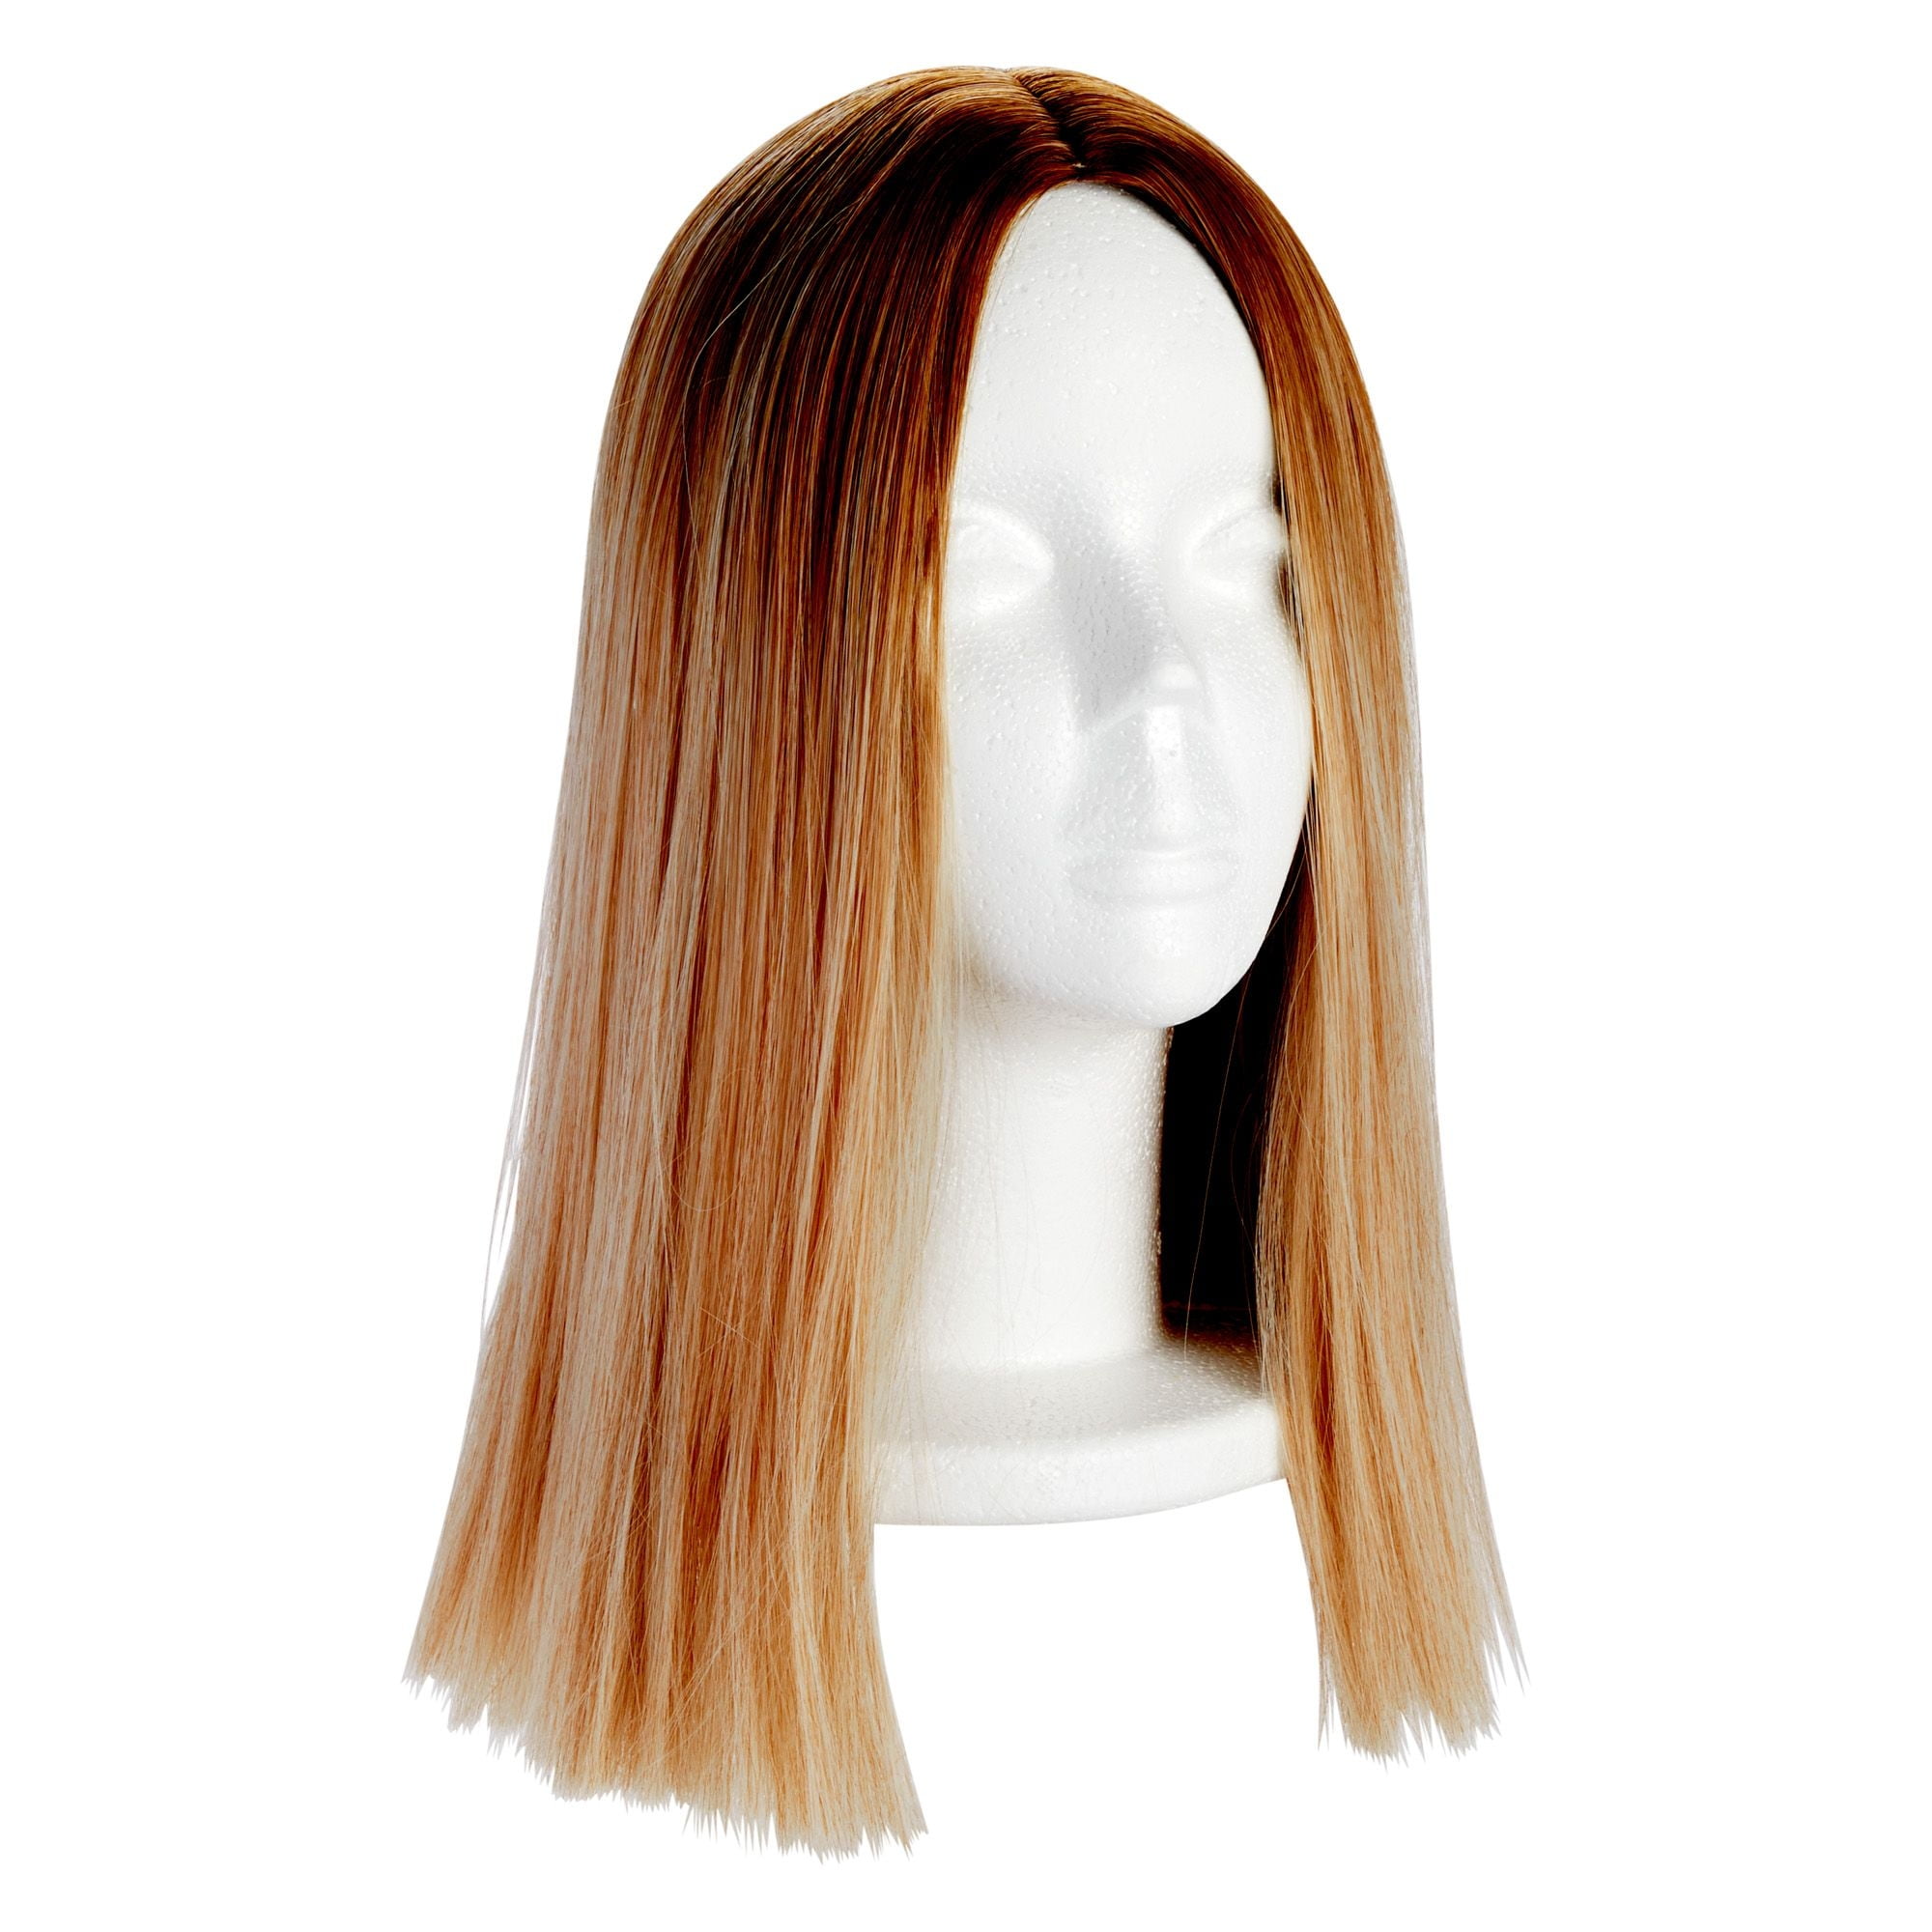 Walbest 11 Foam Wig Head, Tall Female Foam Mannequin Wig Stand and Holder  for Style, Model And Display Hair, Hats and Hairpieces , Mask - for Home,  Salon 